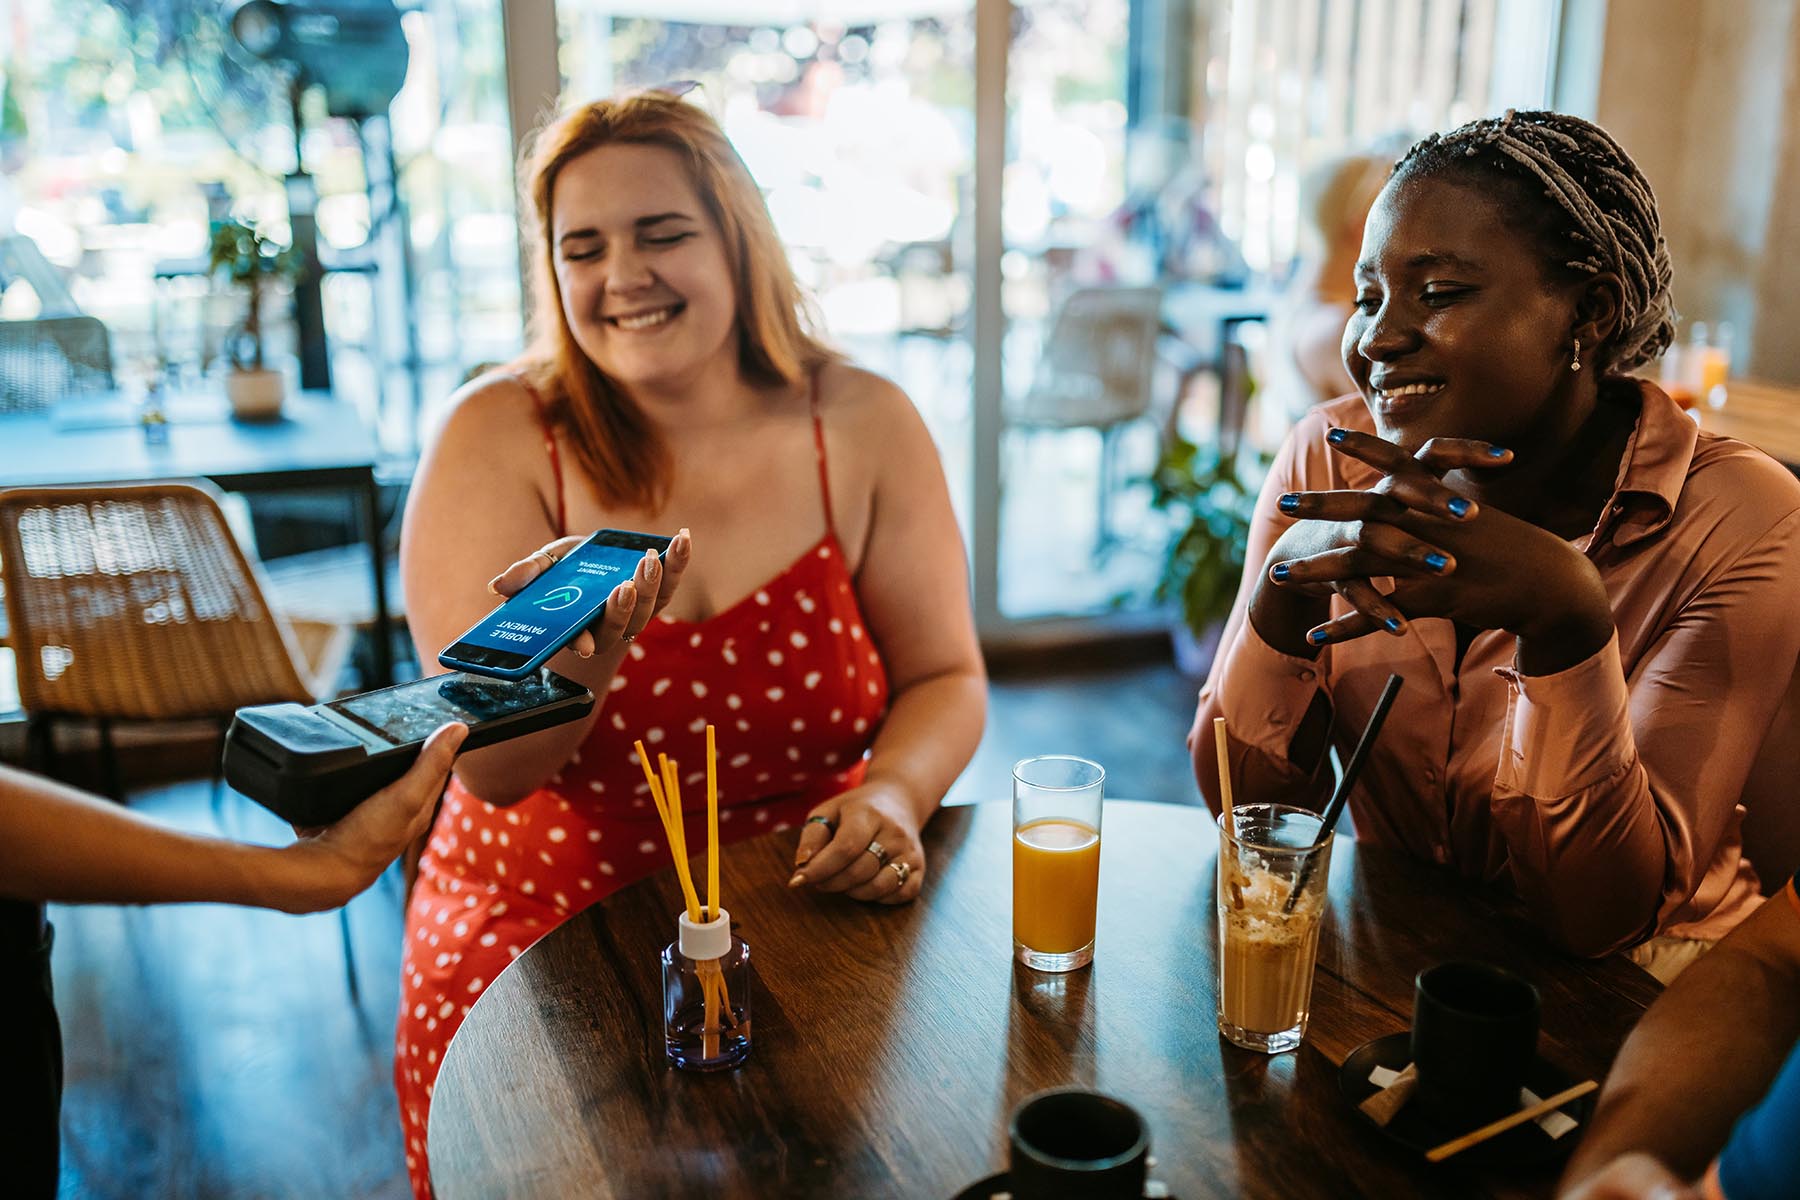 Two smiling friends sitting at a café, drinking juice and coffee. One is paying the bill via a mobile banking application on her phone.